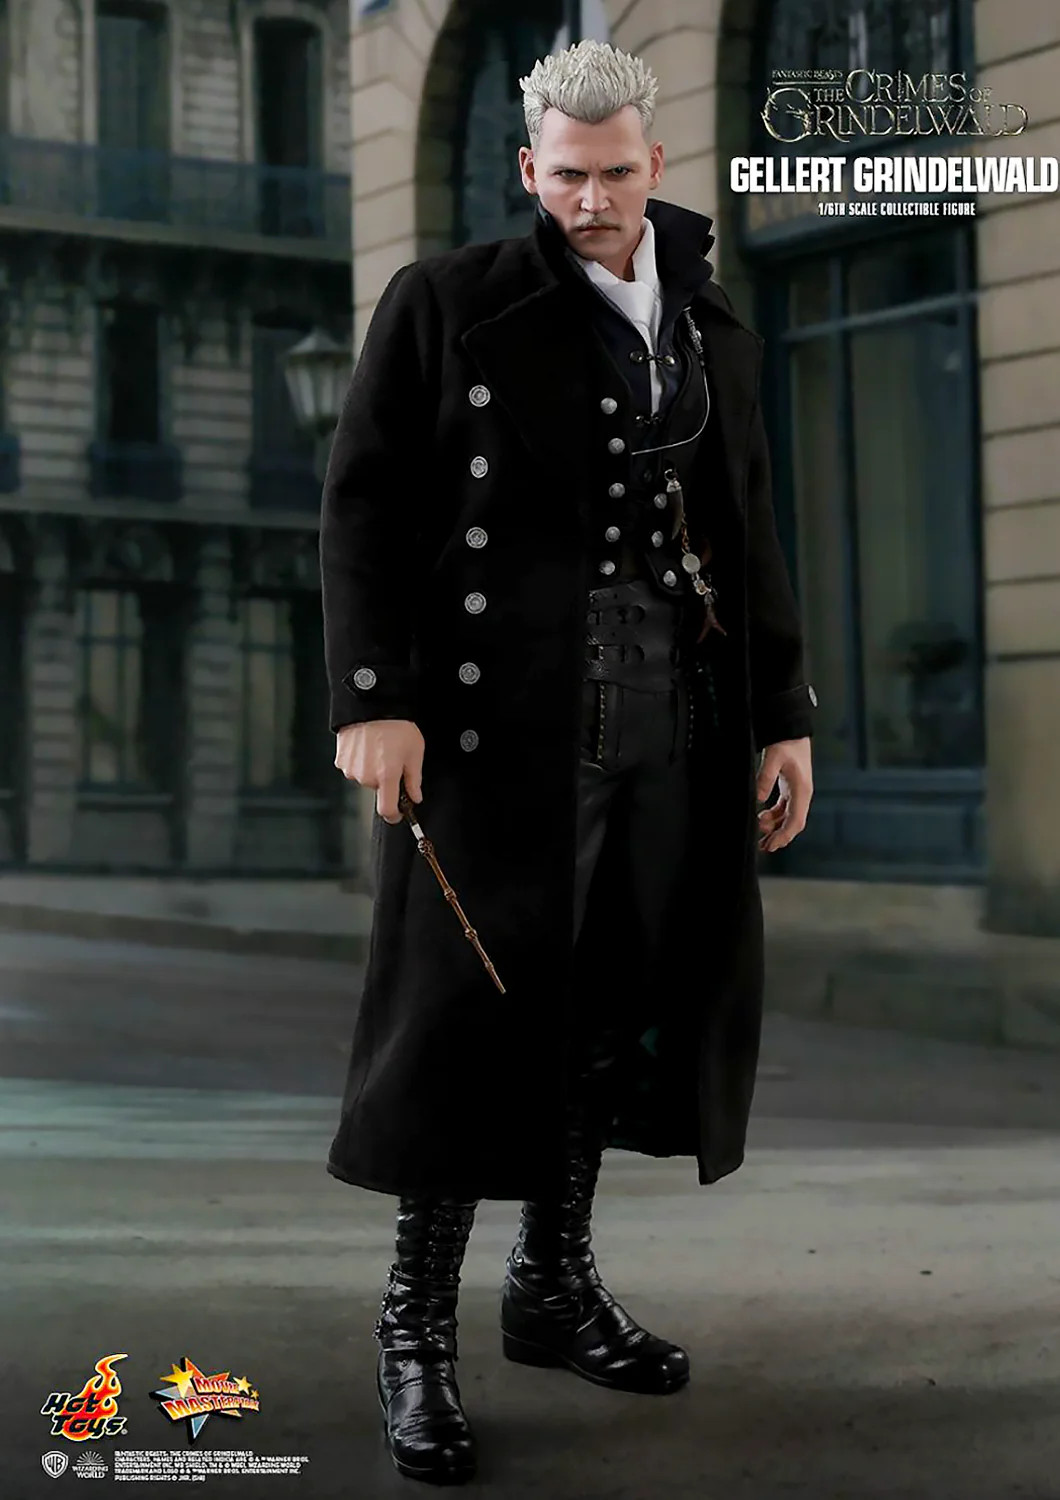 FANTASTIC BEASTS THE CRIMES OF GRINDELWALD GELLERT GRINDELWALD 1/6TH SCALE COLLECTIBLE